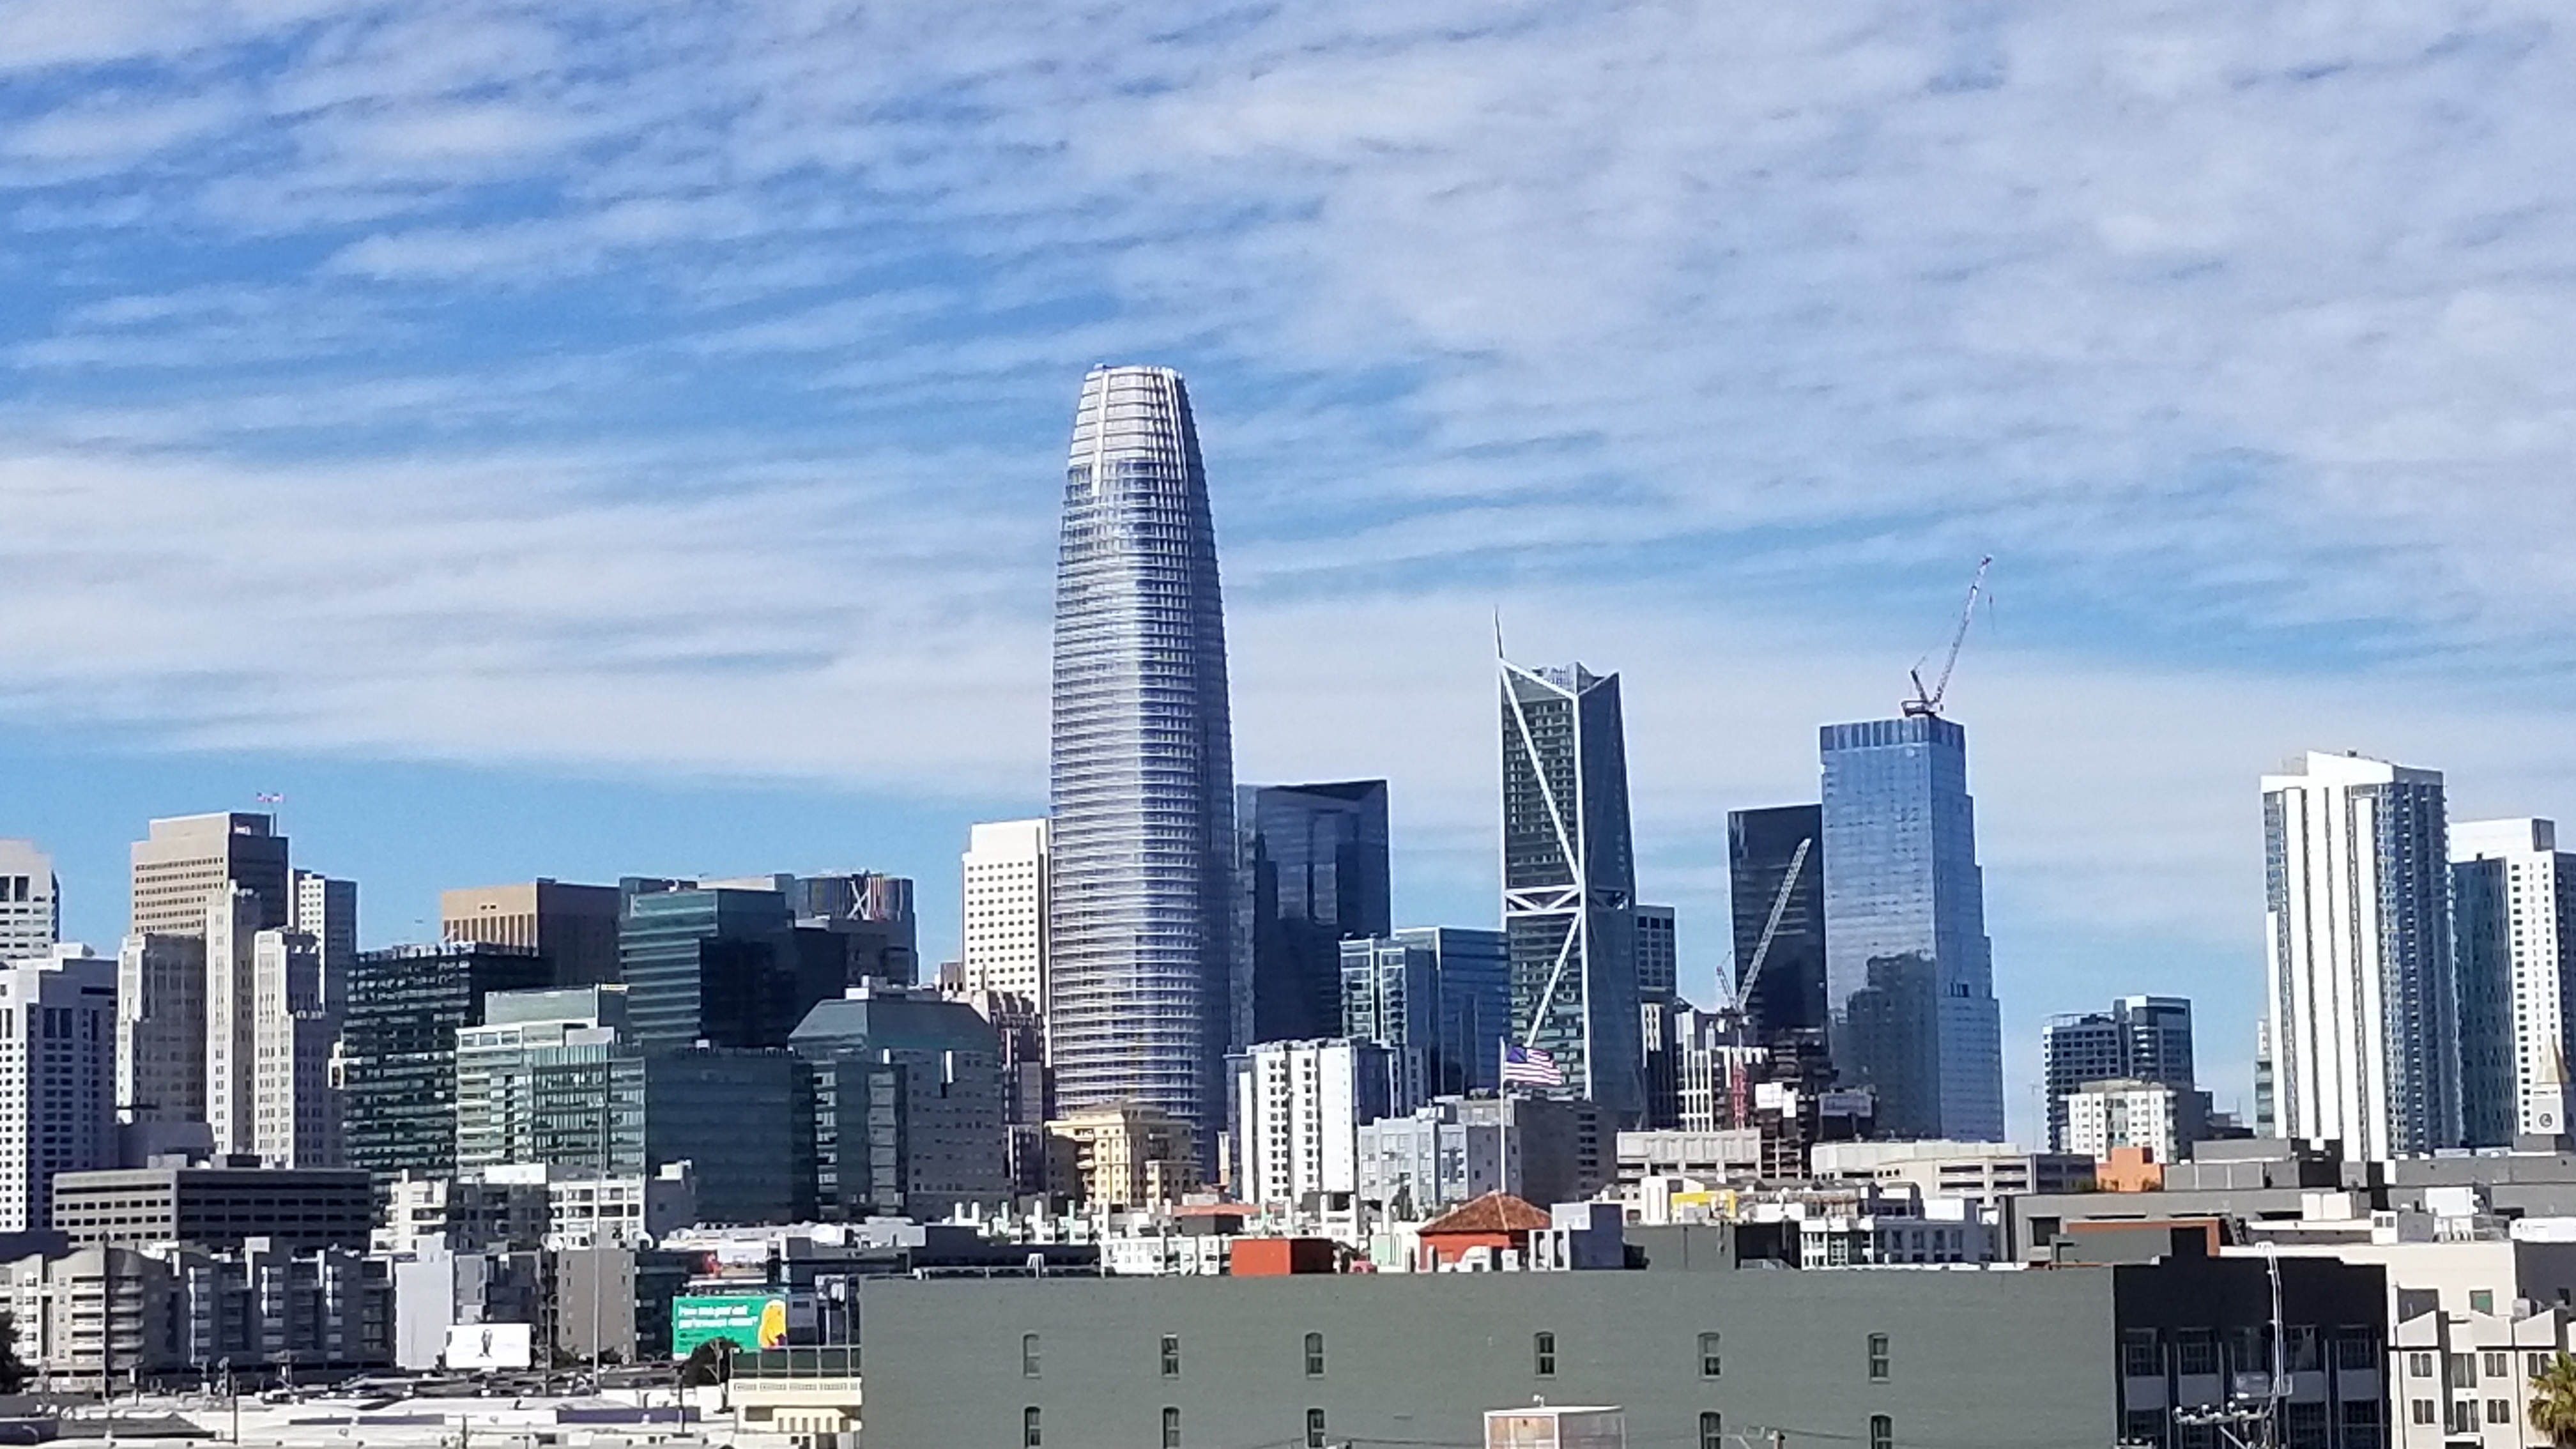 San Francisco's skyline is constantly evolving and always dramatic.